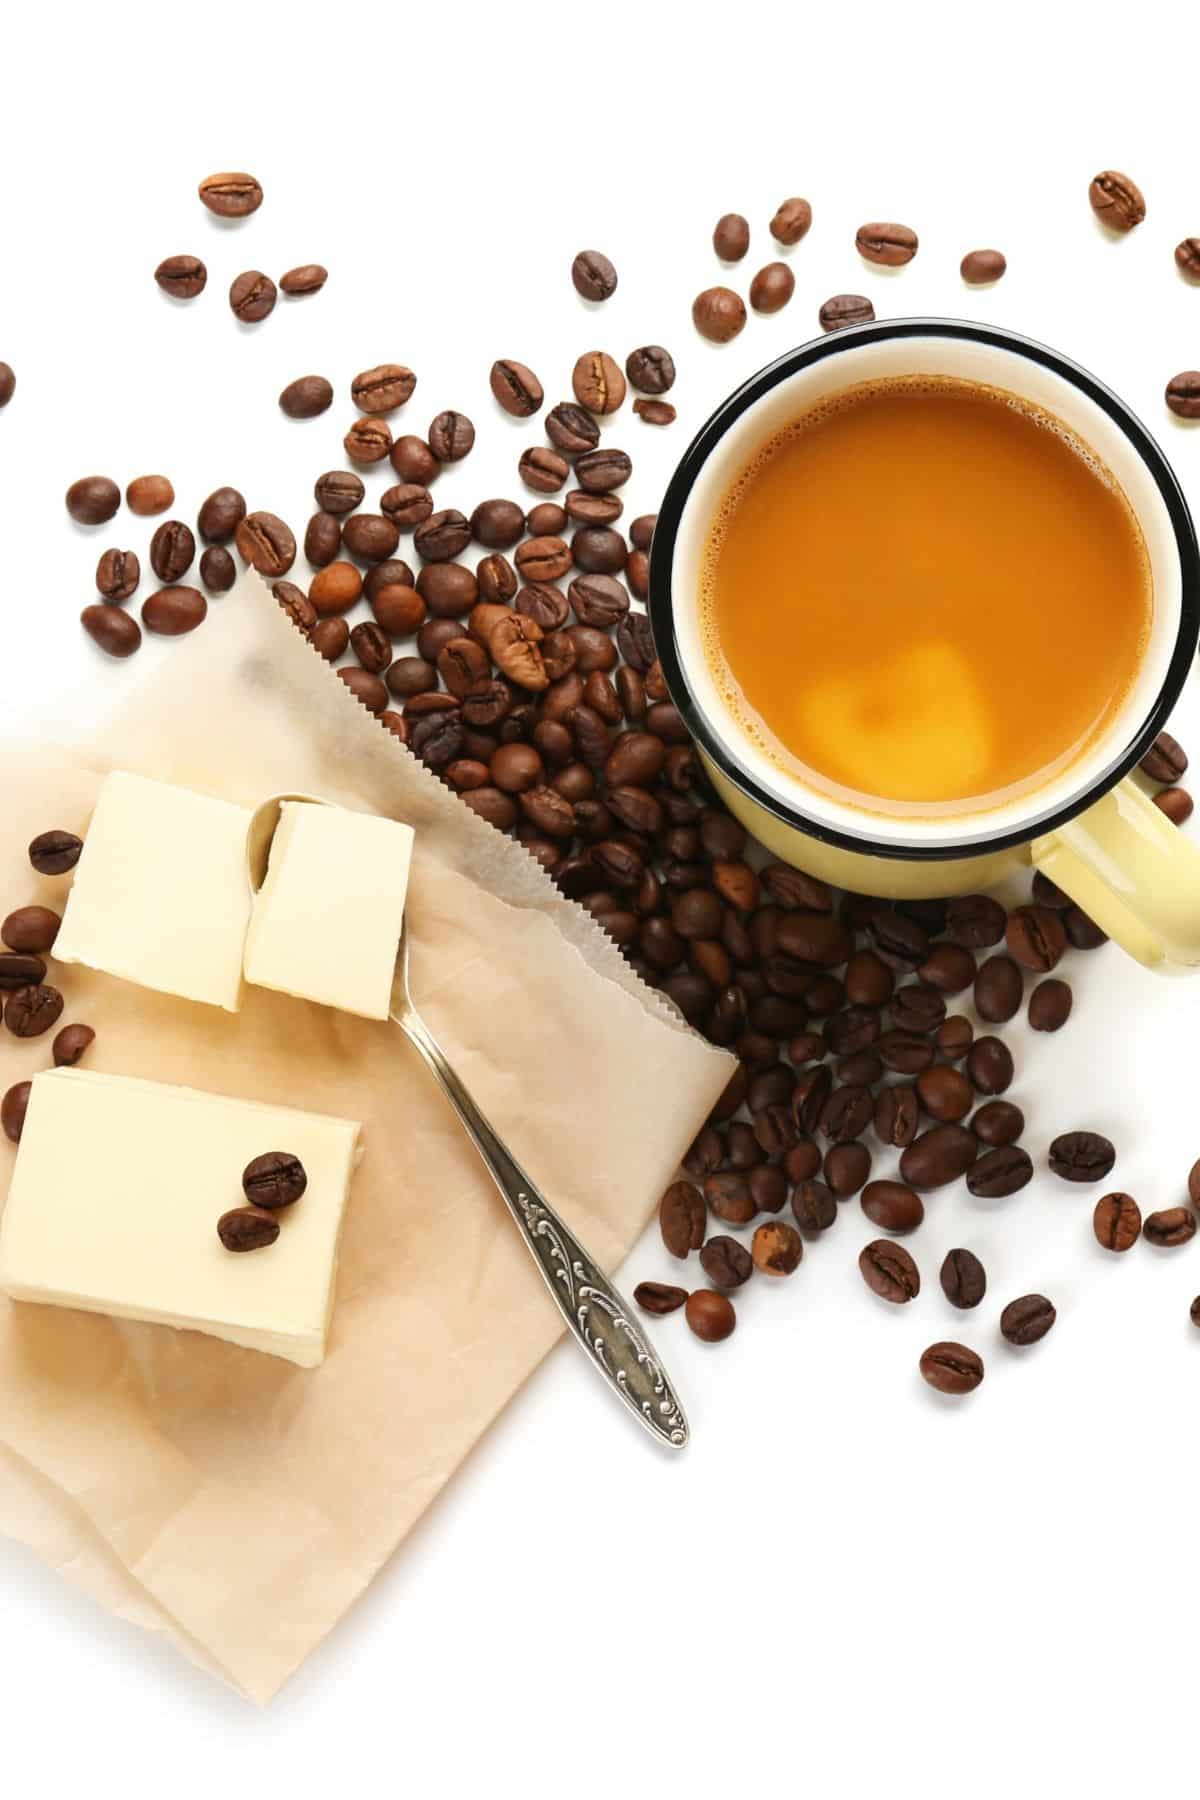 https://www.cleaneatingkitchen.com/wp-content/uploads/2020/12/butter-coffee-on-a-tabletop-with-coffee-beans.jpg